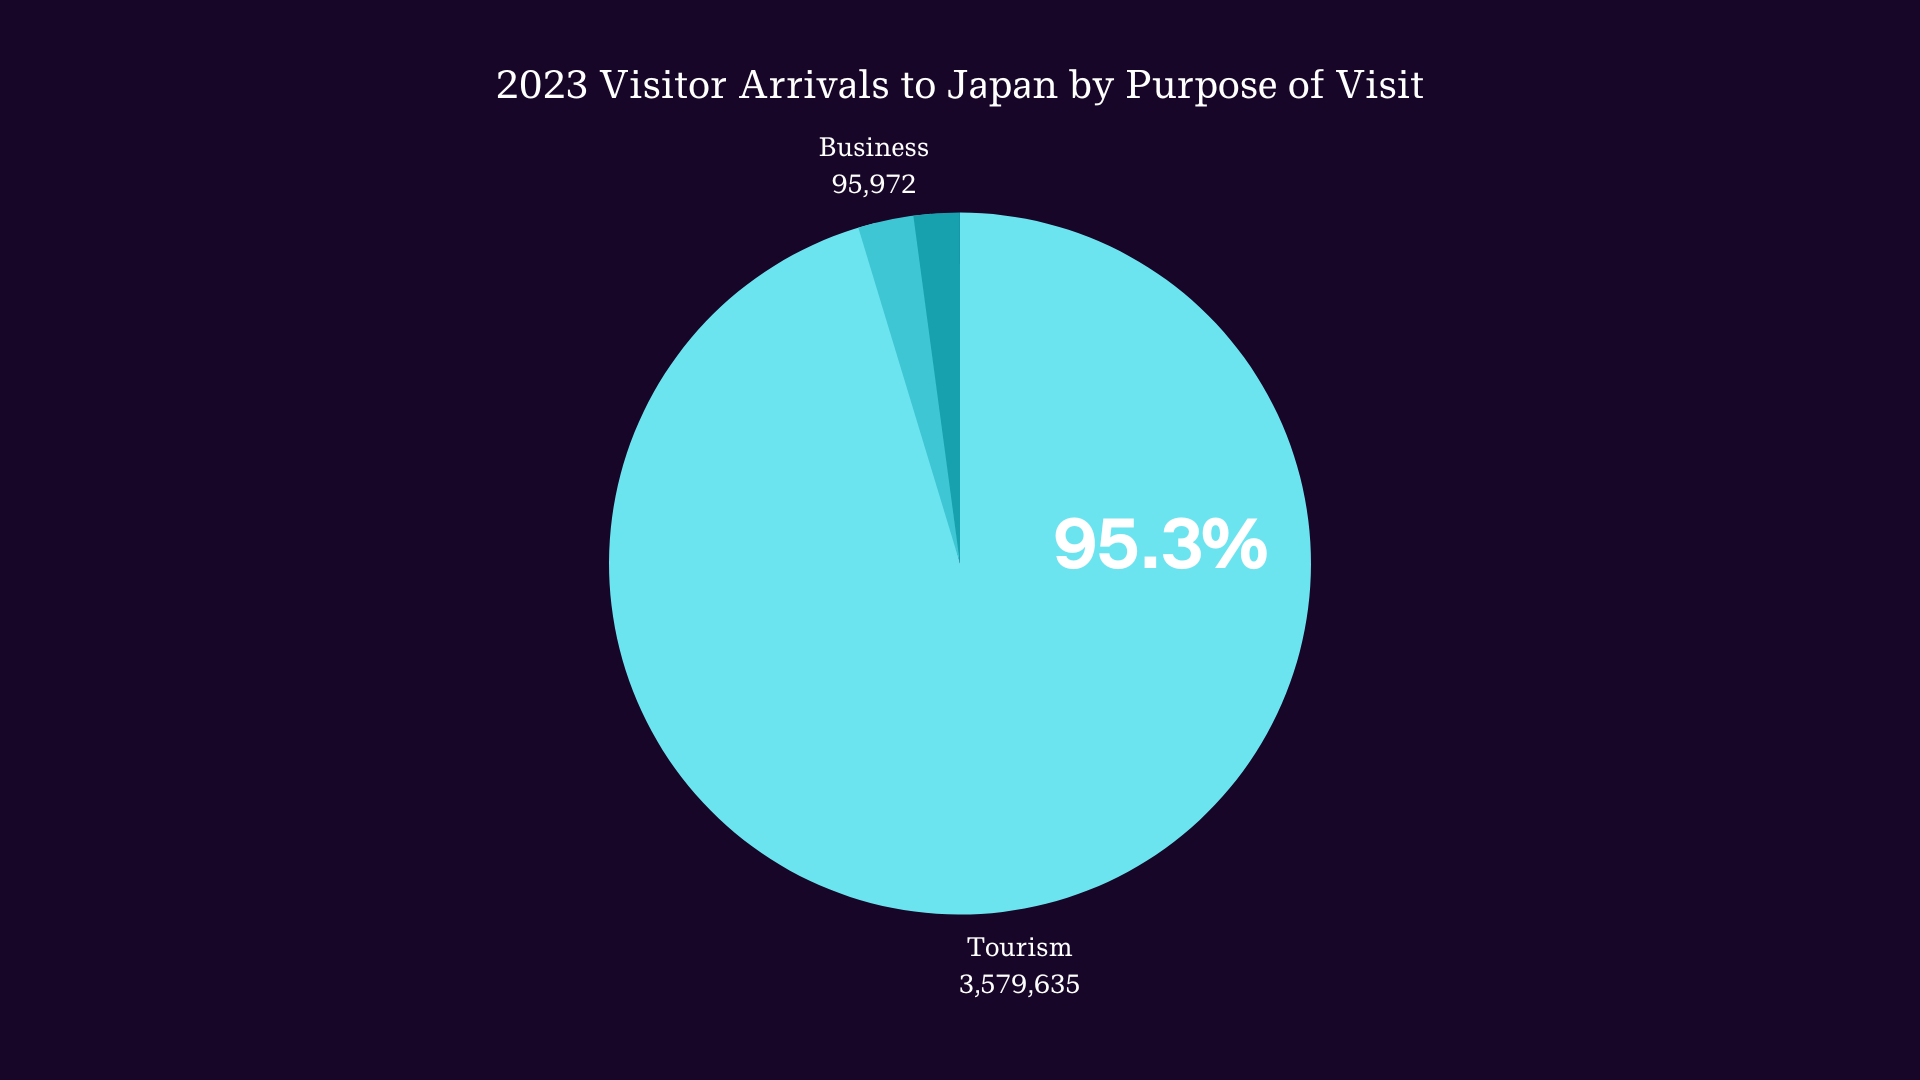 2023 Visitor Arrivals to Japan by Purpose of Visit